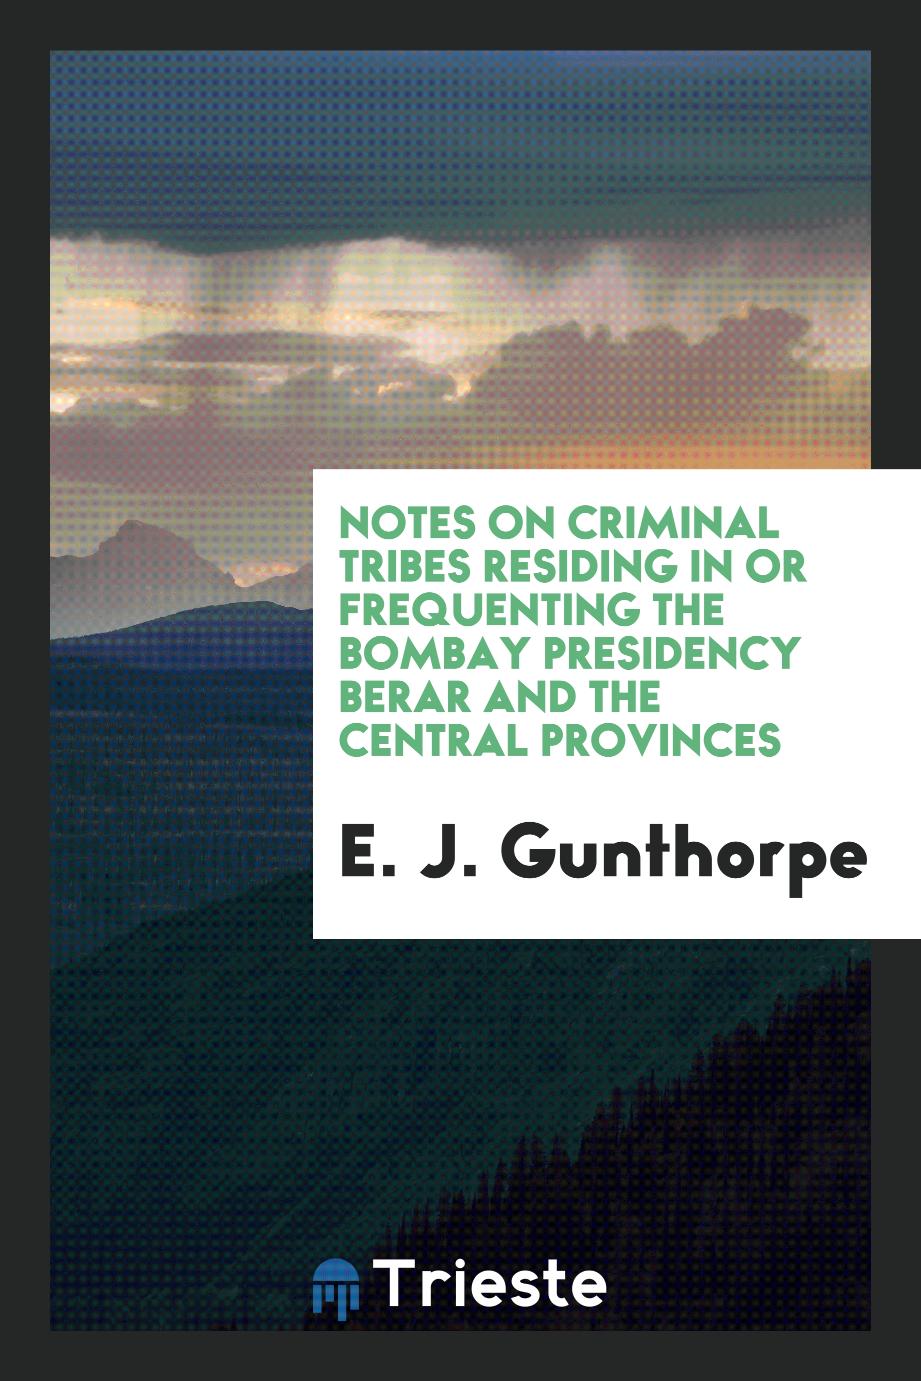 Notes on Criminal Tribes Residing in Or Frequenting the Bombay Presidency Berar and the Central Provinces